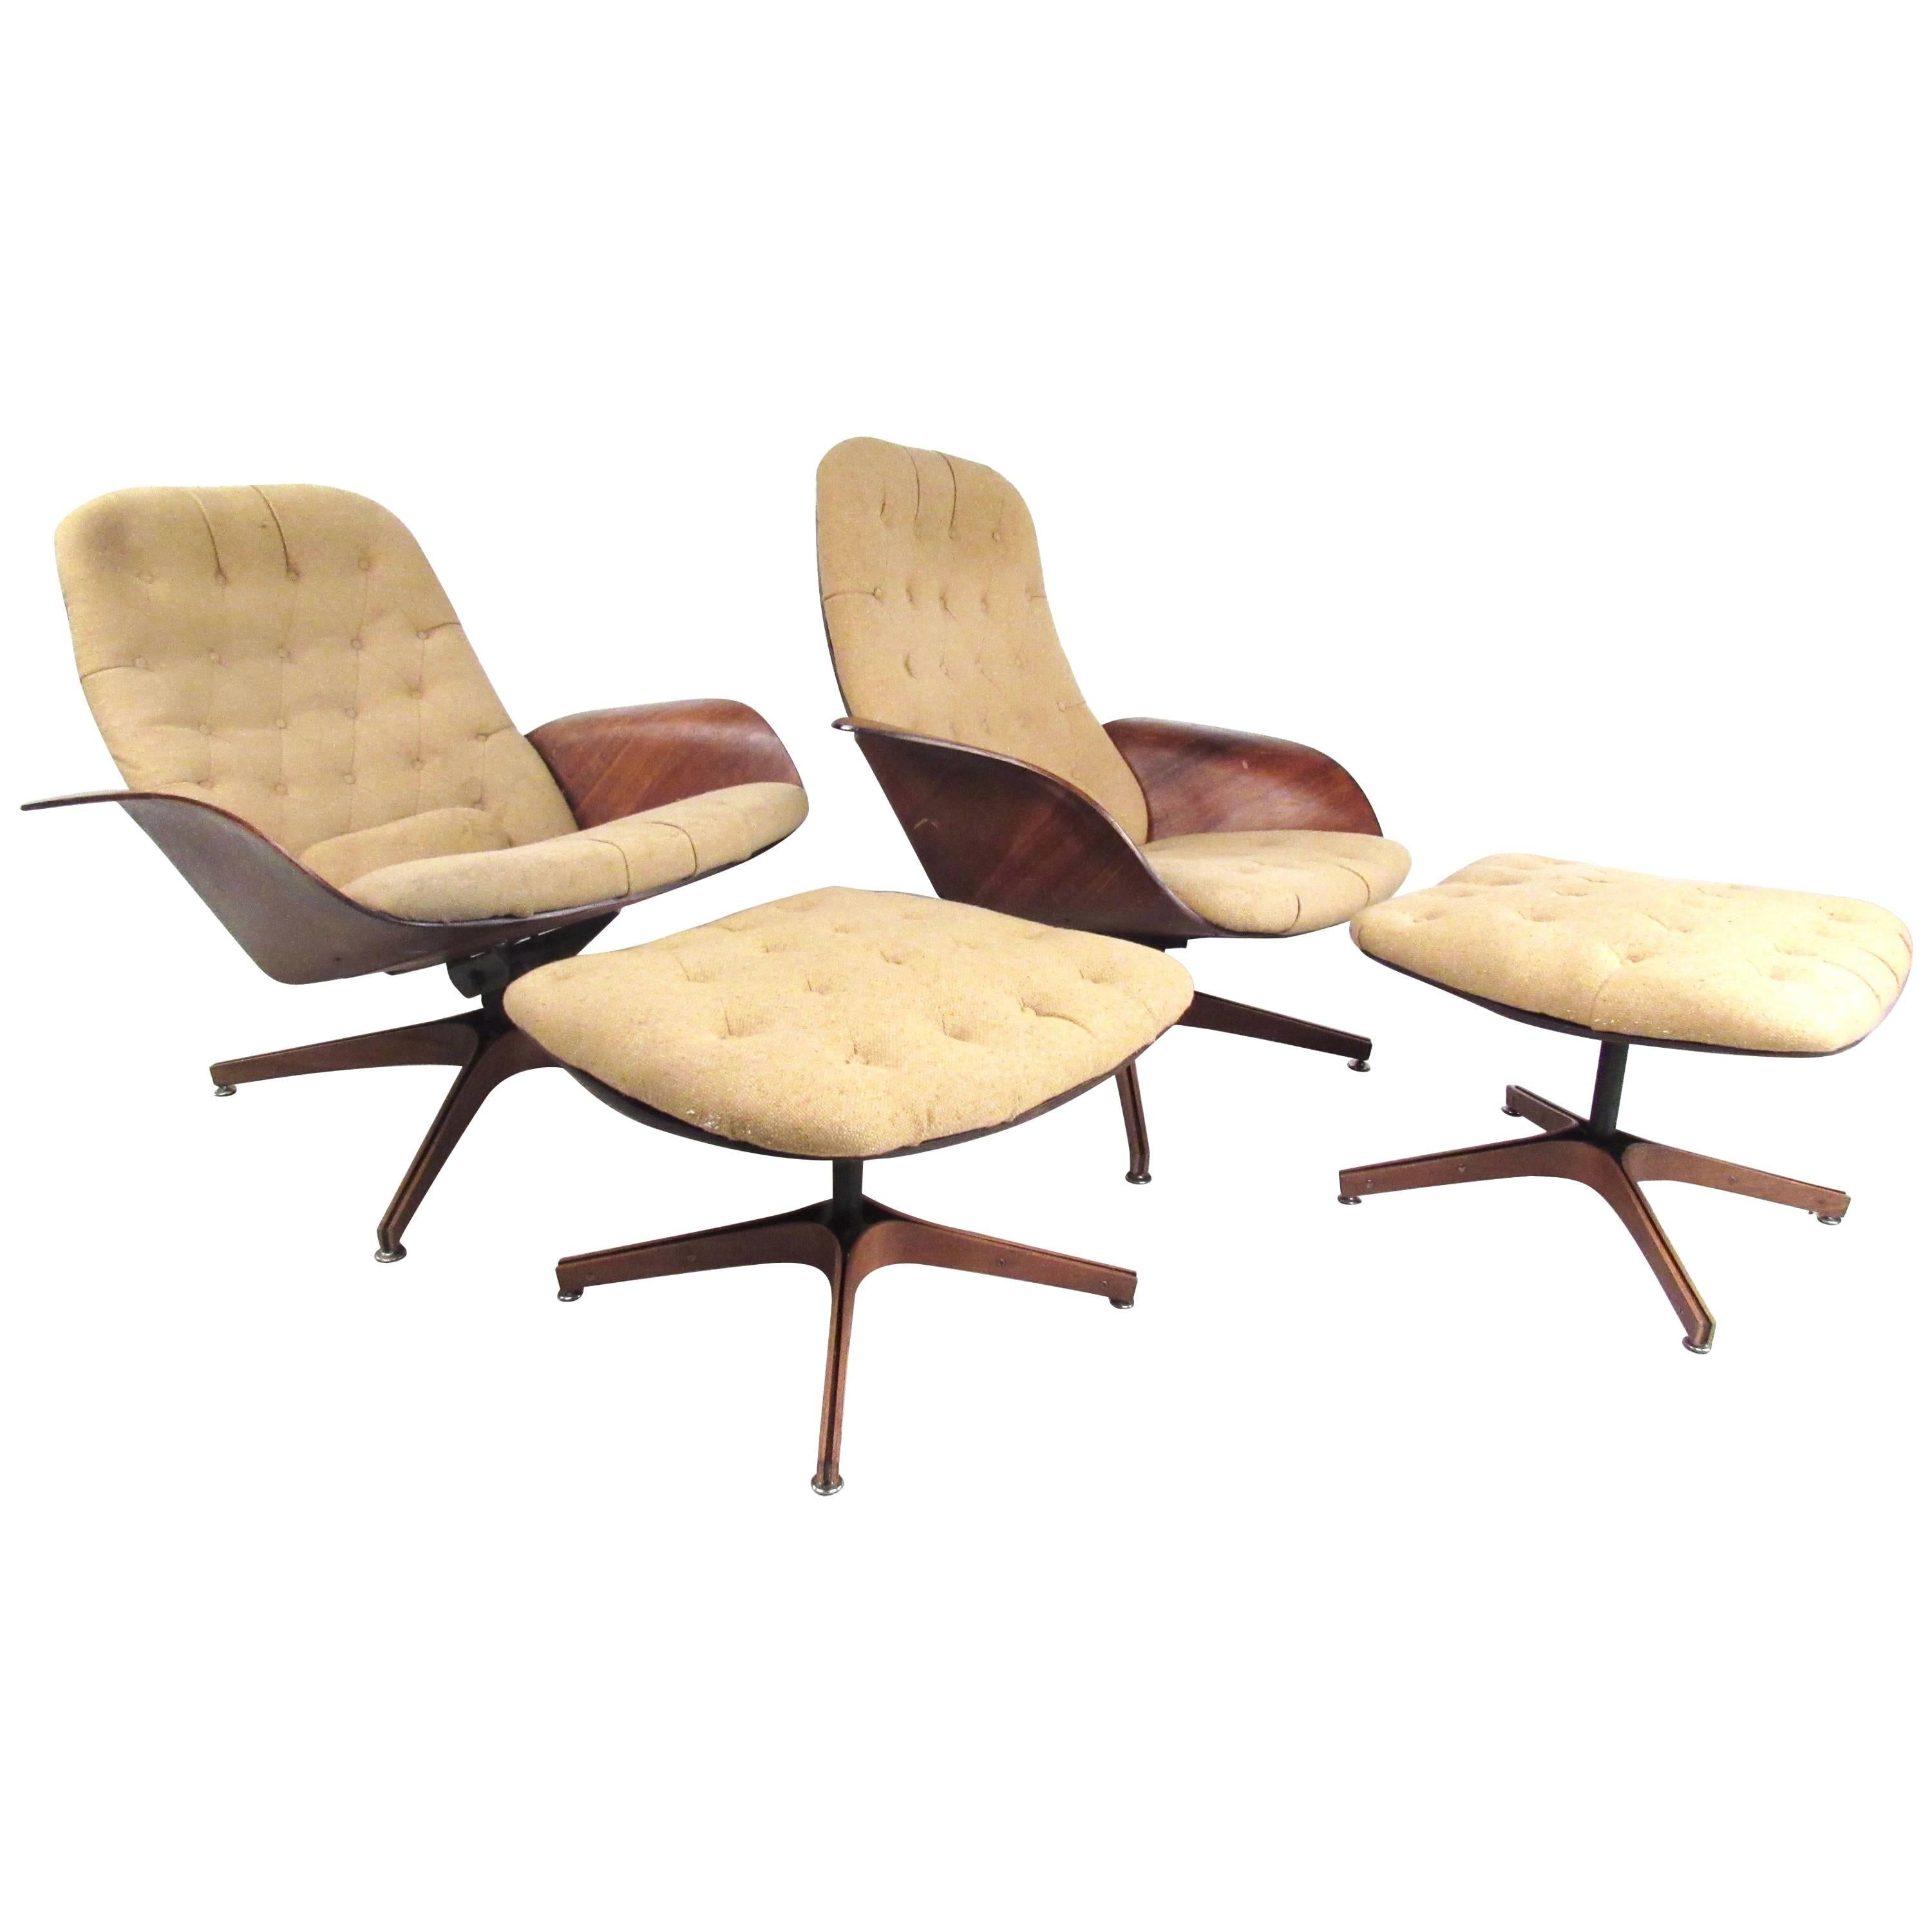 Pair of Mid-Century Modern Swivel Lounge Chairs by George Mulhauser by Plycraft